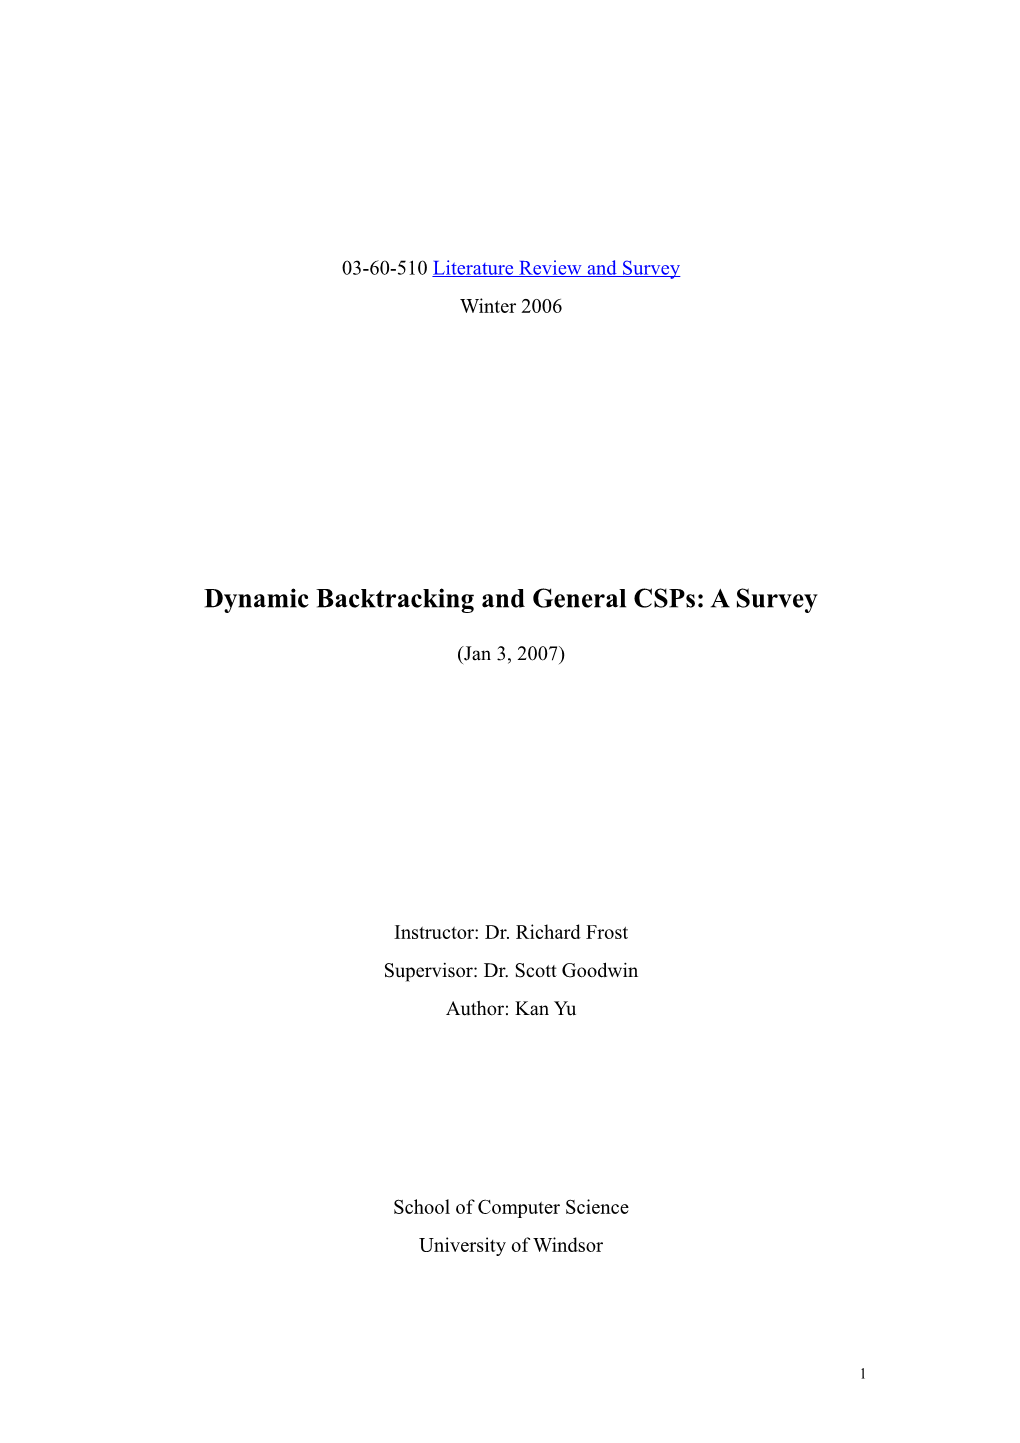 Dynamic Backtracking and General Csps: a Survey